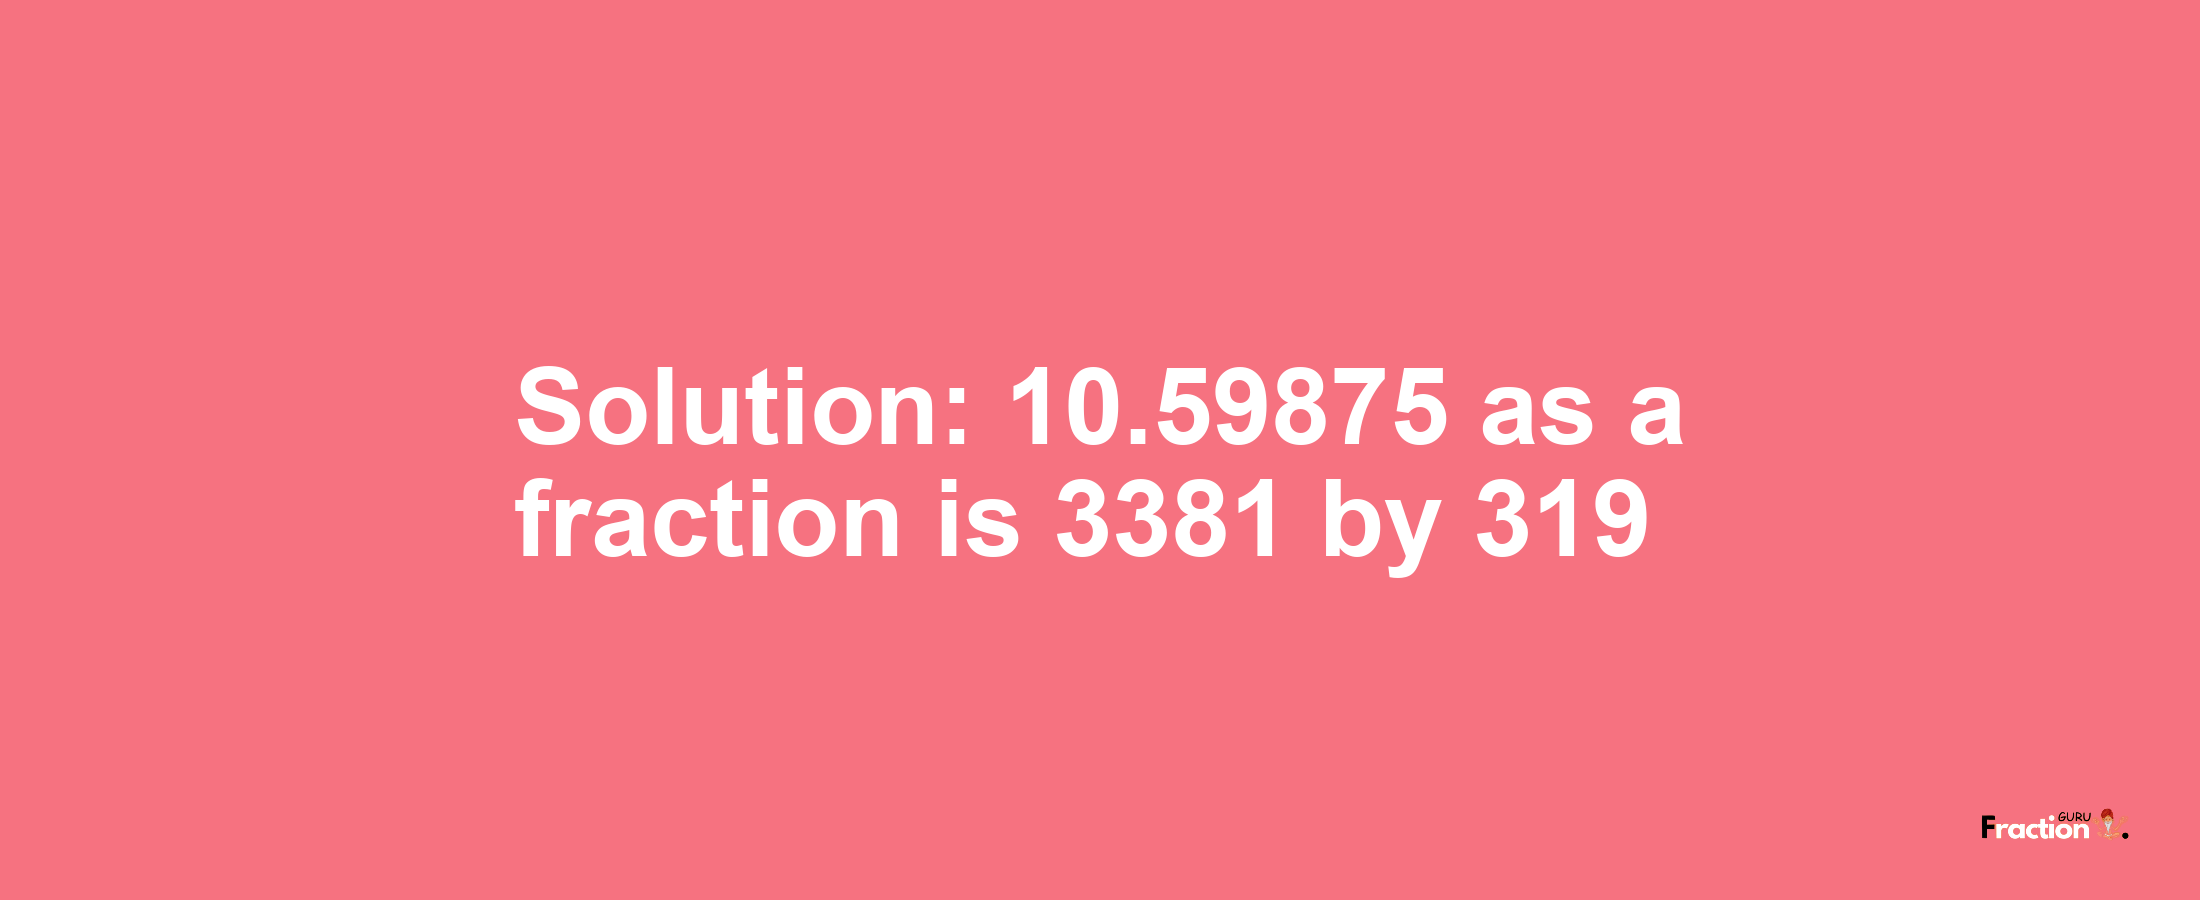 Solution:10.59875 as a fraction is 3381/319